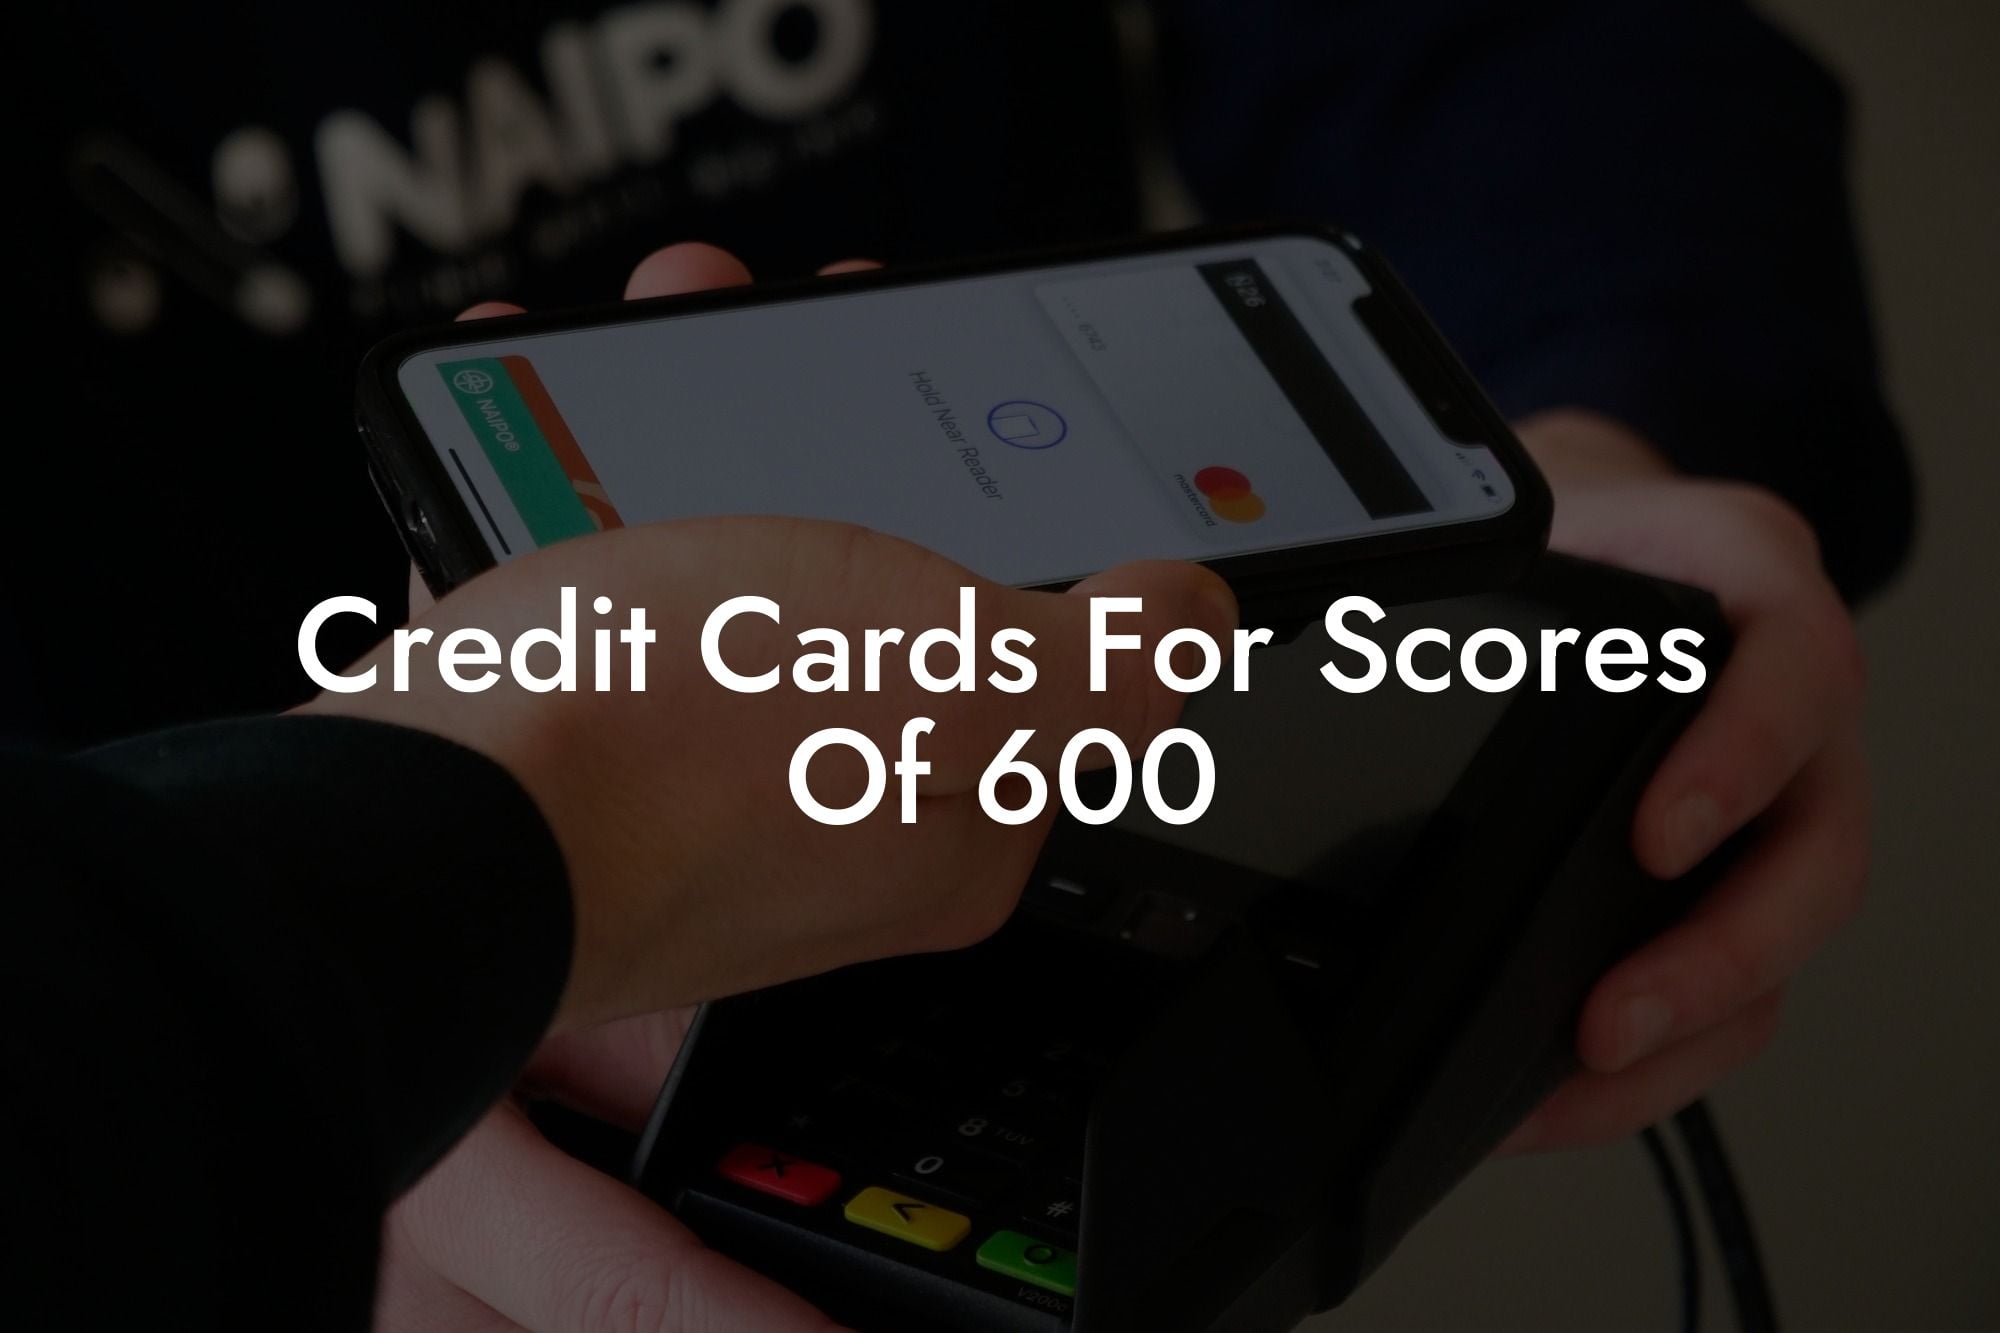 Credit Cards For Scores Of 600